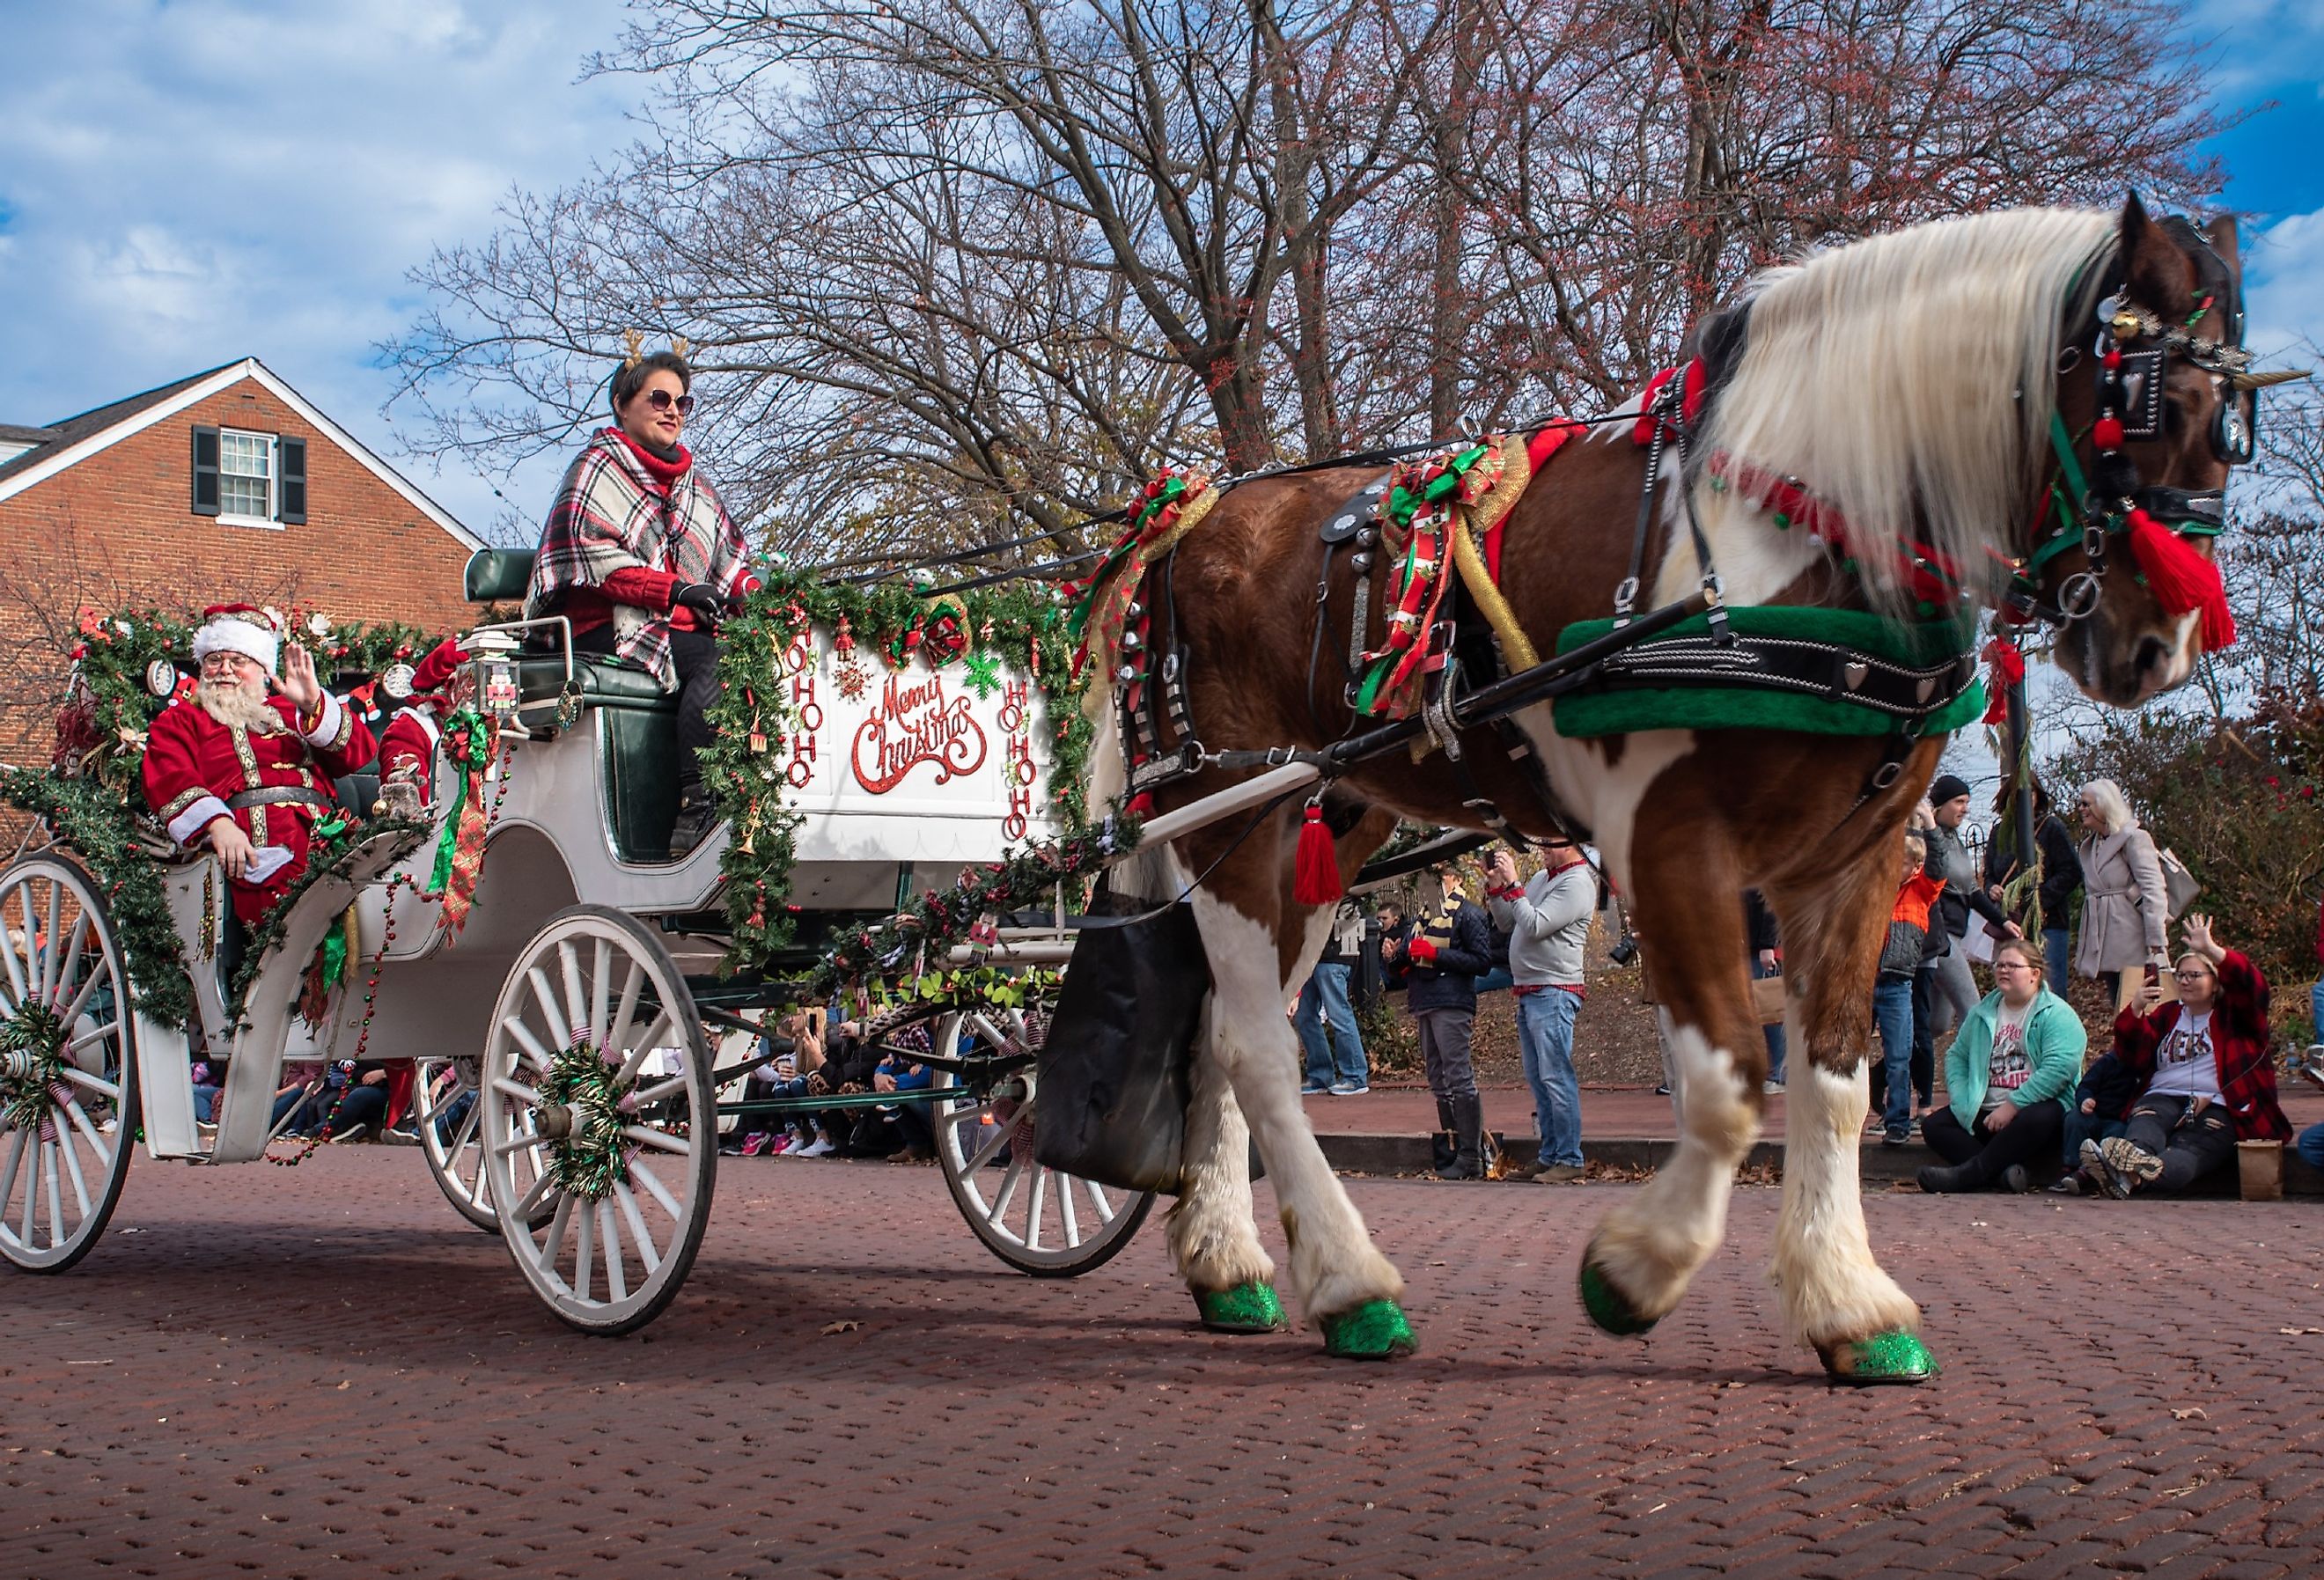 Santa and Mrs Claus wave from a horse drawn carriage in the Christmas and Holiday parade in Saint Charles, Missouri. Image credit RozenskiP via Shutterstock